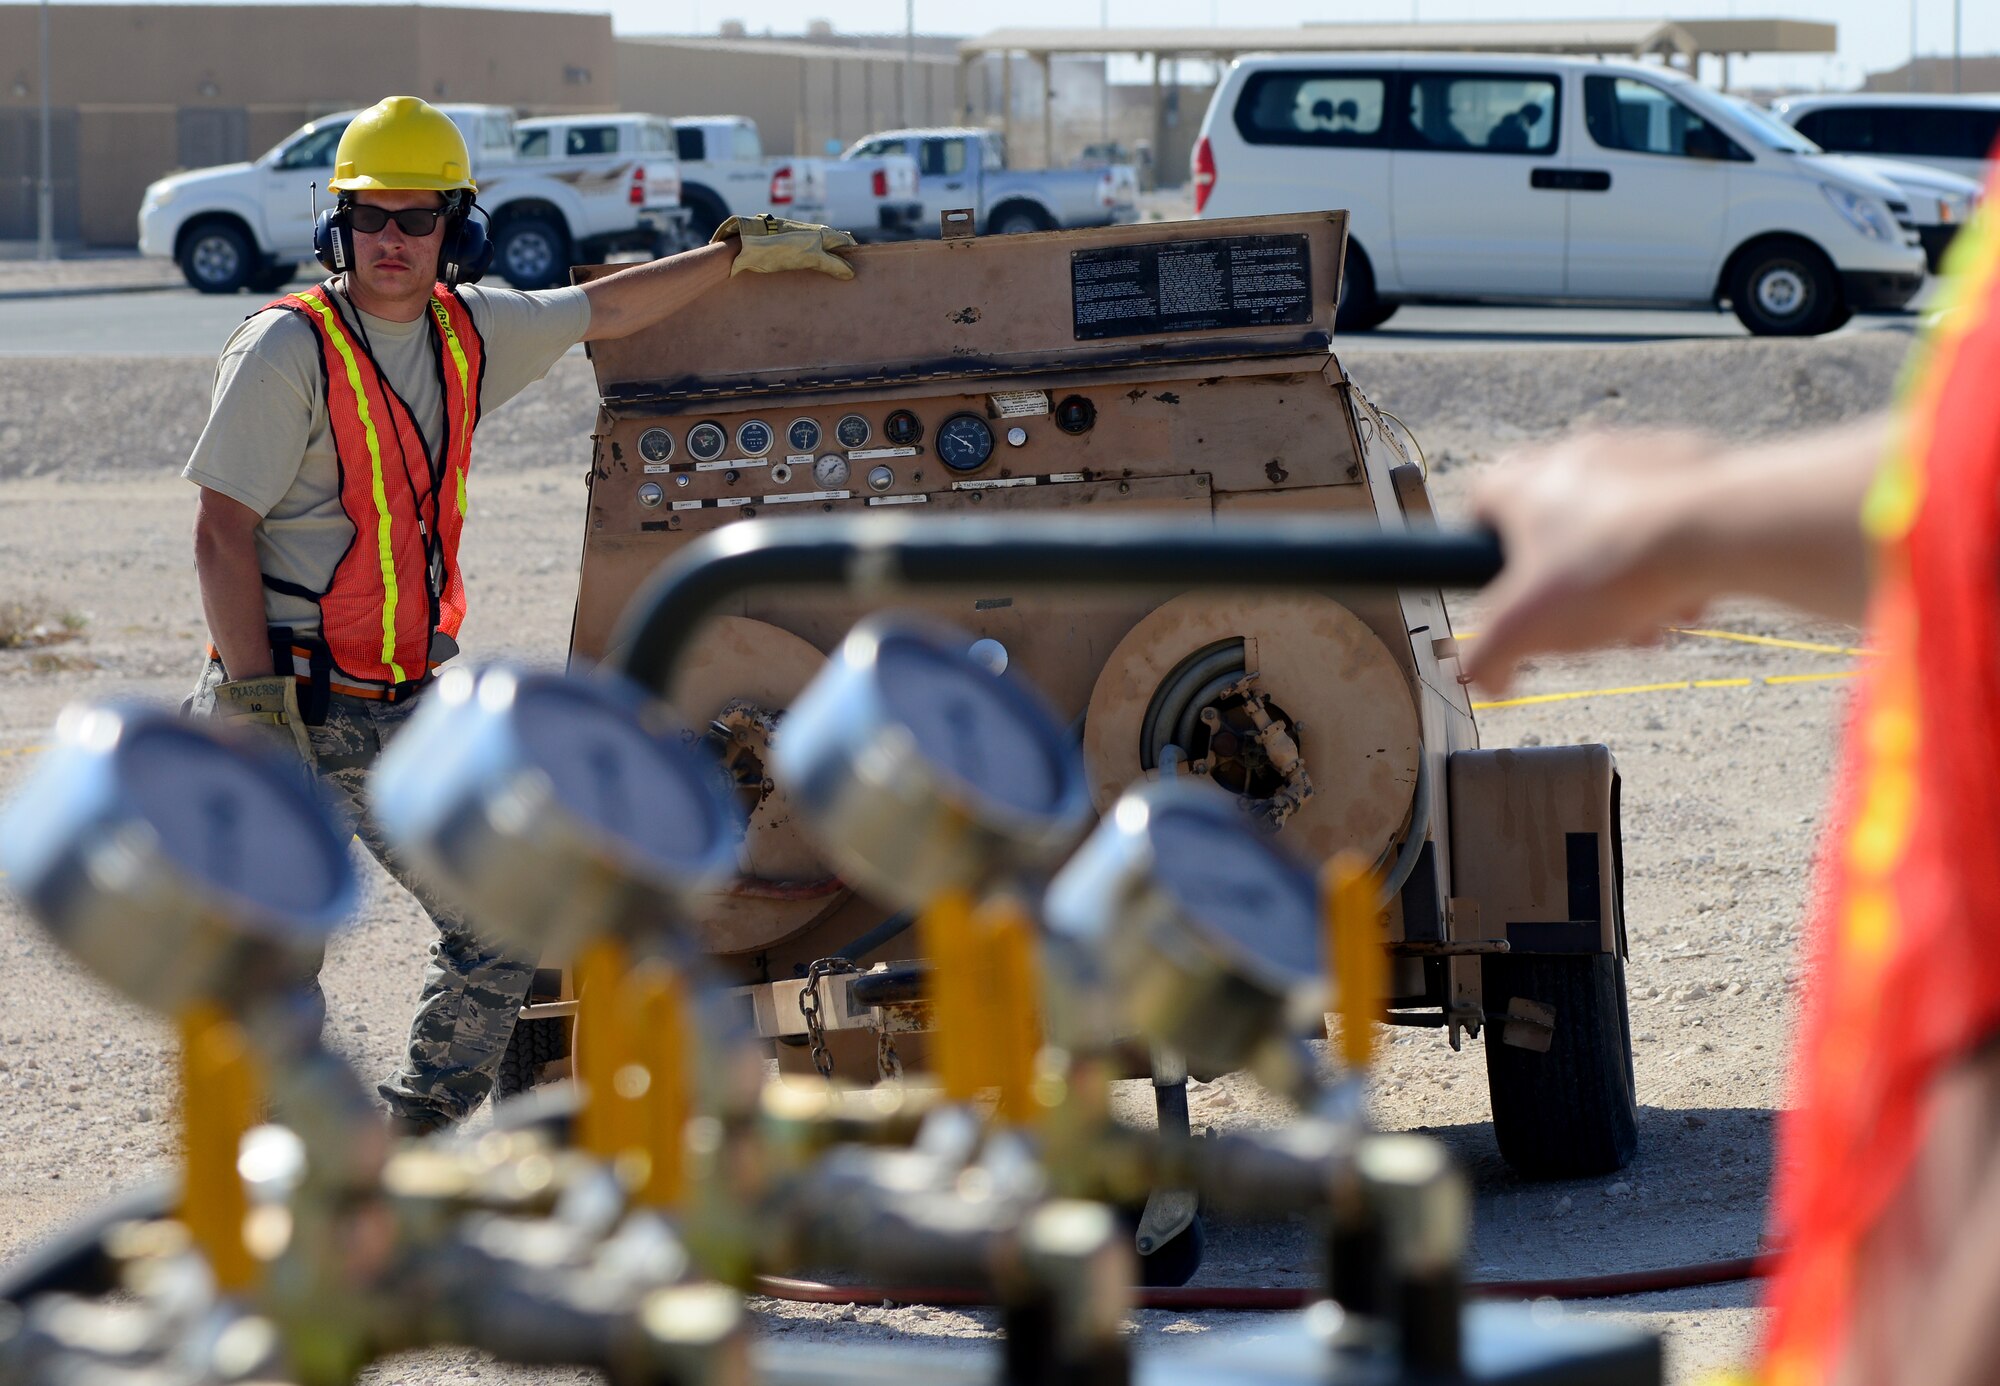 U.S. Air Force Airmen from the 379th Expeditionary Maintenance Group conduct a Crashed, Damaged, Disabled Aircraft Recovery (CDDAR) exercise, Nov. 11, 2014, at Al Udeid Air Base, Qatar. The 379th EMXG CDDAR team is responsible for recovering aircraft and clearing the debris of crashed aircraft throughout the U.S. Central Command’s area of responsibility. (U.S. Air Force photo by Senior Airman Kia Atkins)